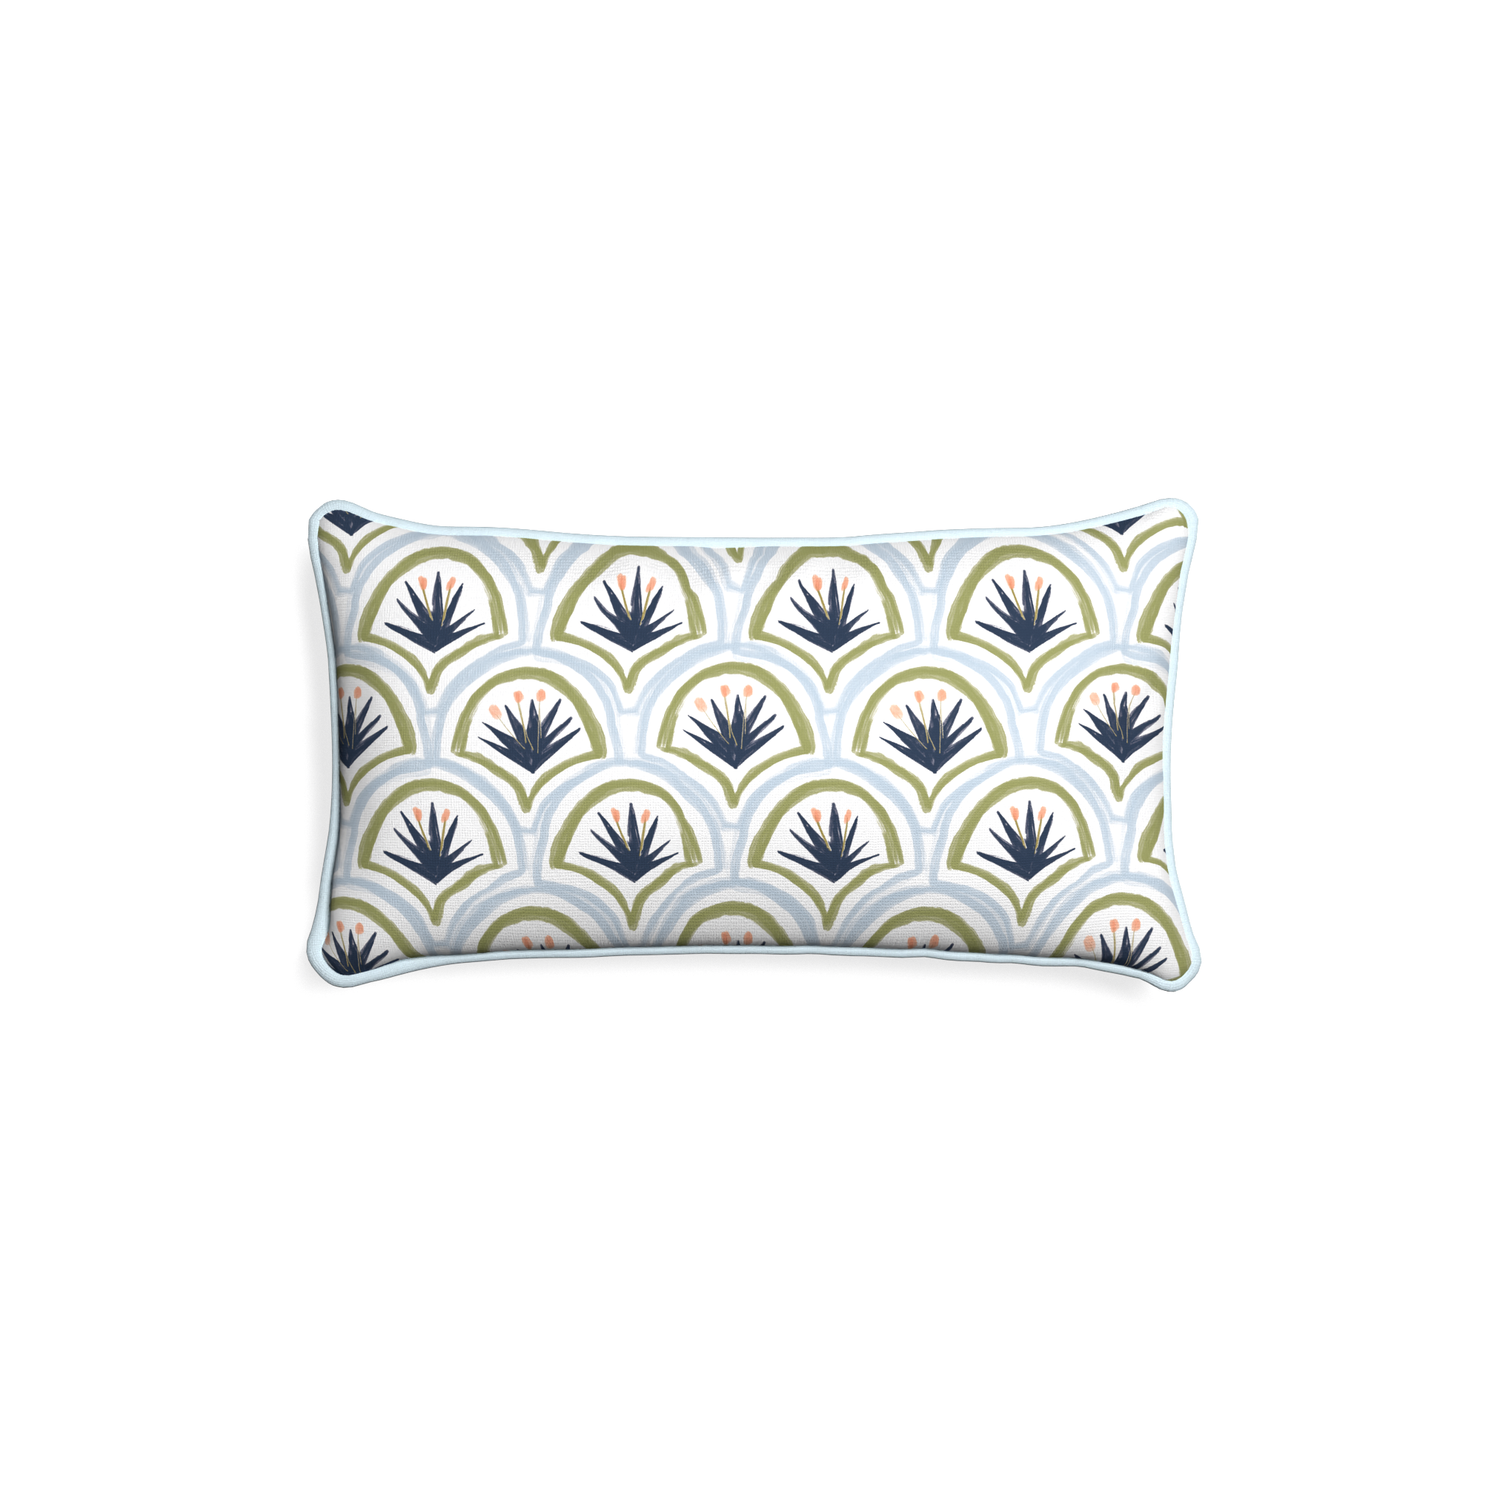 Petite-lumbar thatcher midnight custom art deco palm patternpillow with powder piping on white background